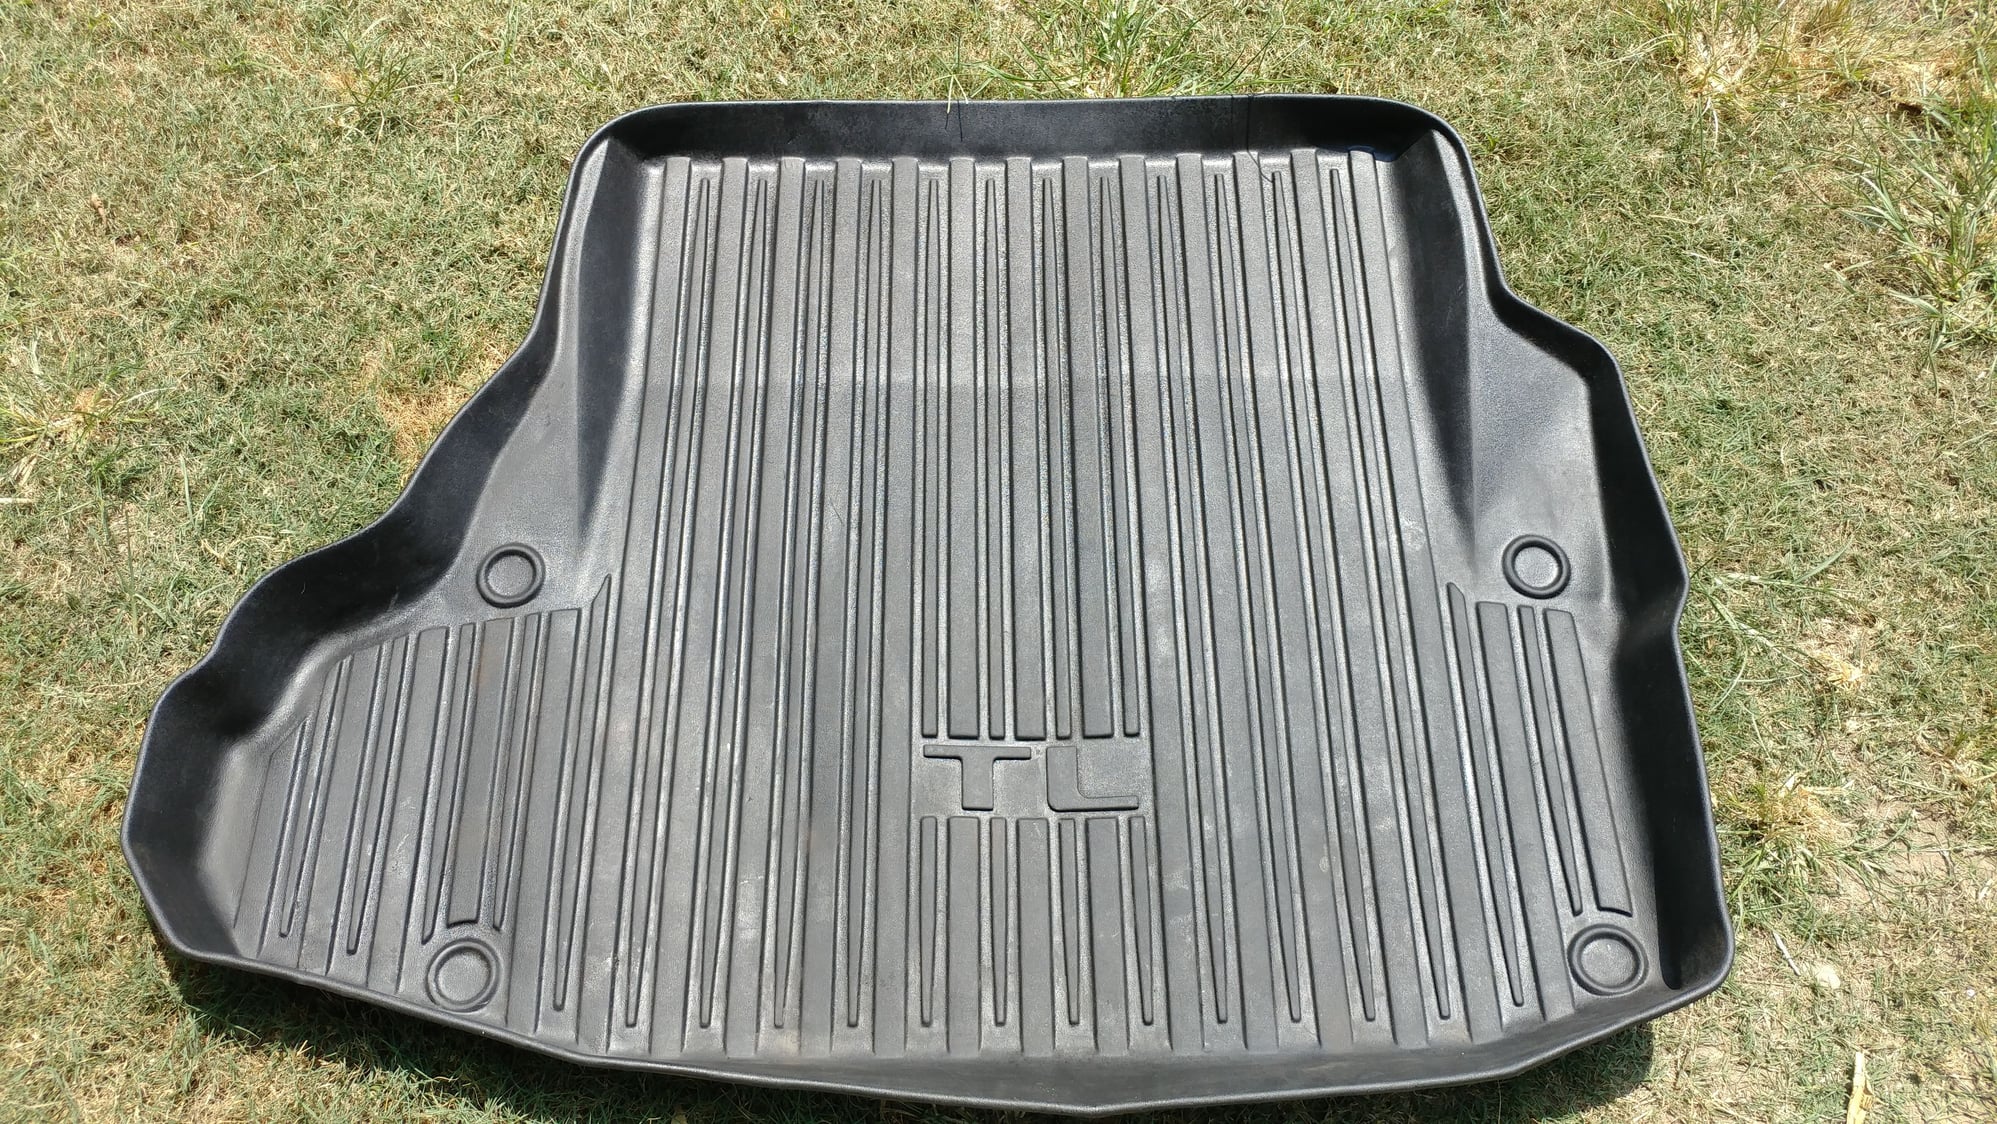 2008 Acura TL - OEM Trunk Tray and Floor Mats - Accessories - $100 - Houston, TX 77053, United States